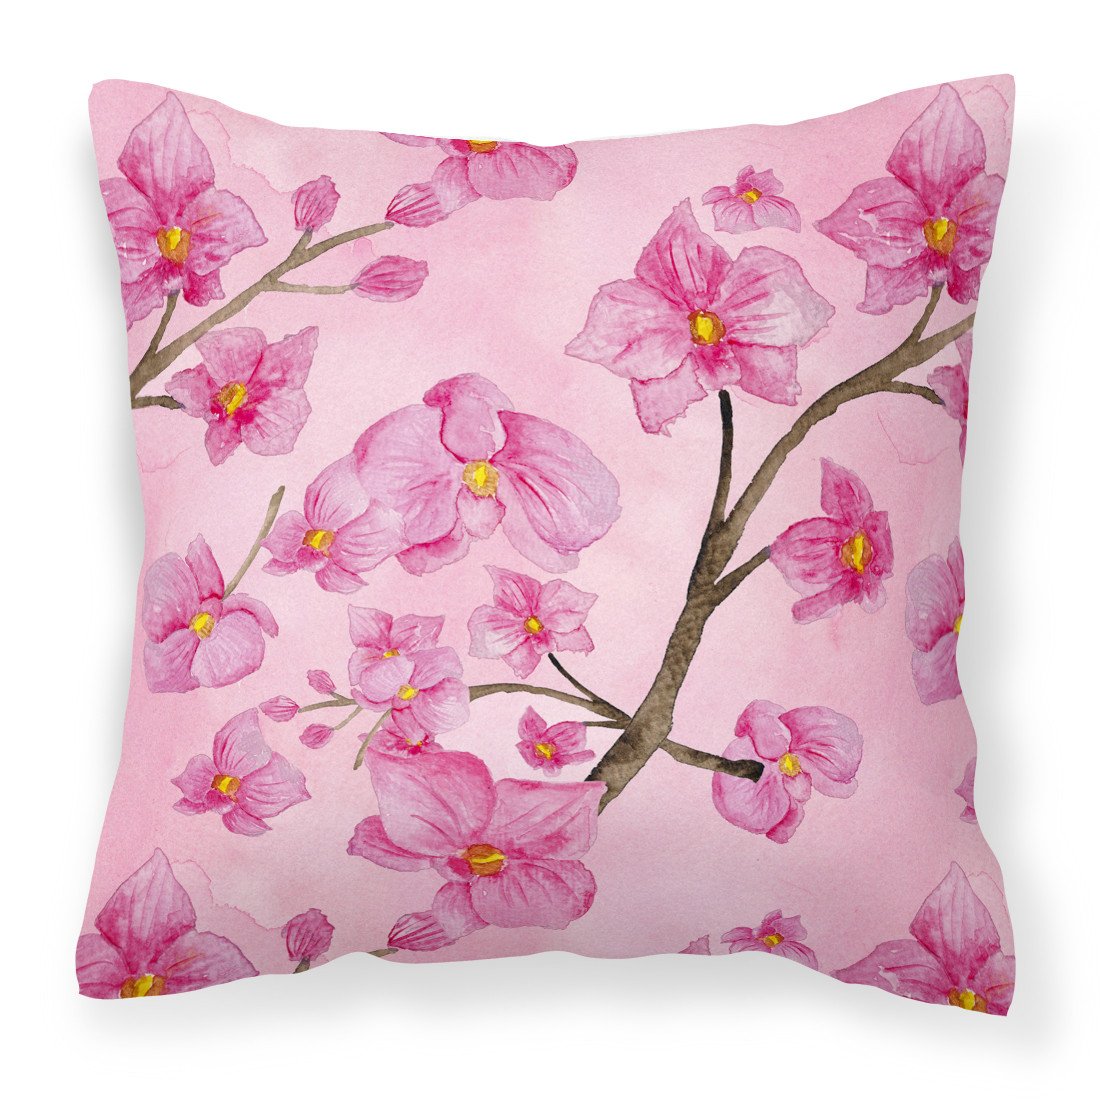 Watercolor Pink Flowers Fabric Decorative Pillow BB7505PW1818 by Caroline's Treasures